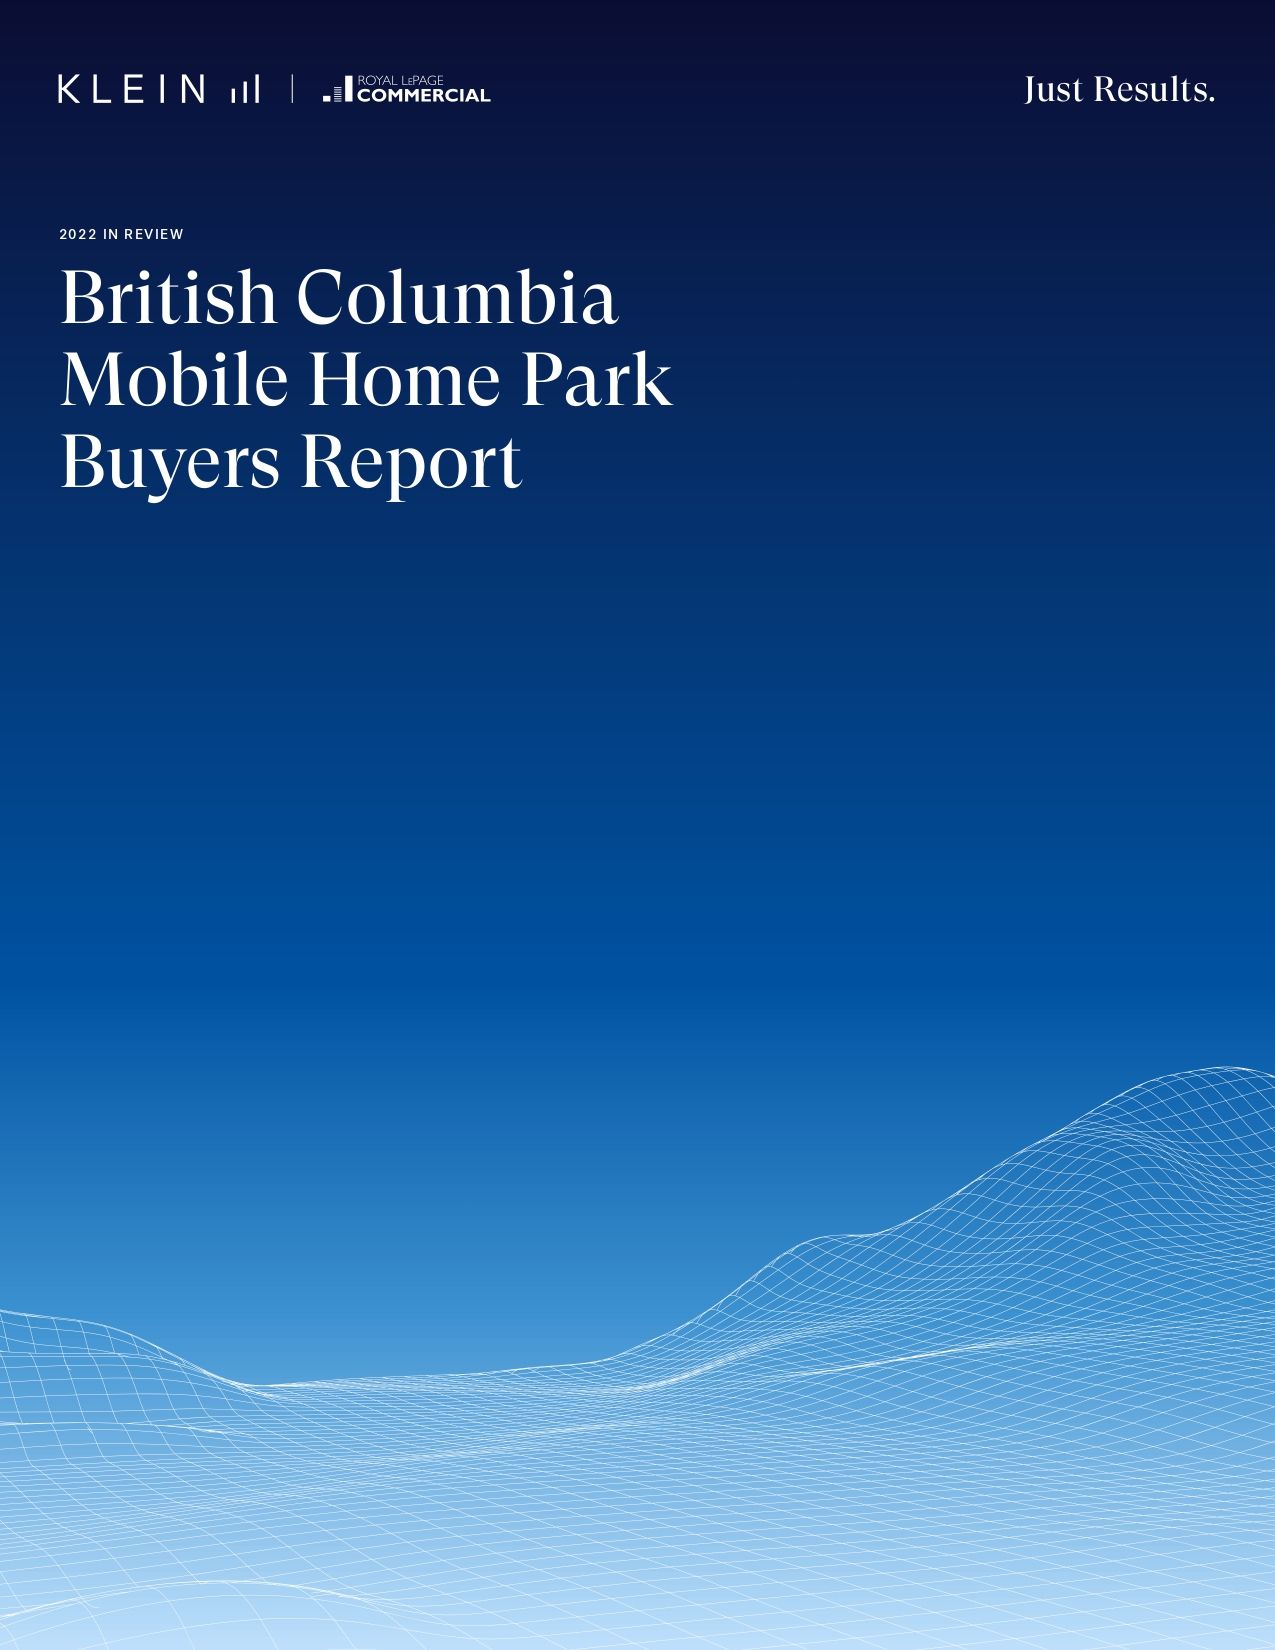 MHP Buyers Report Cover